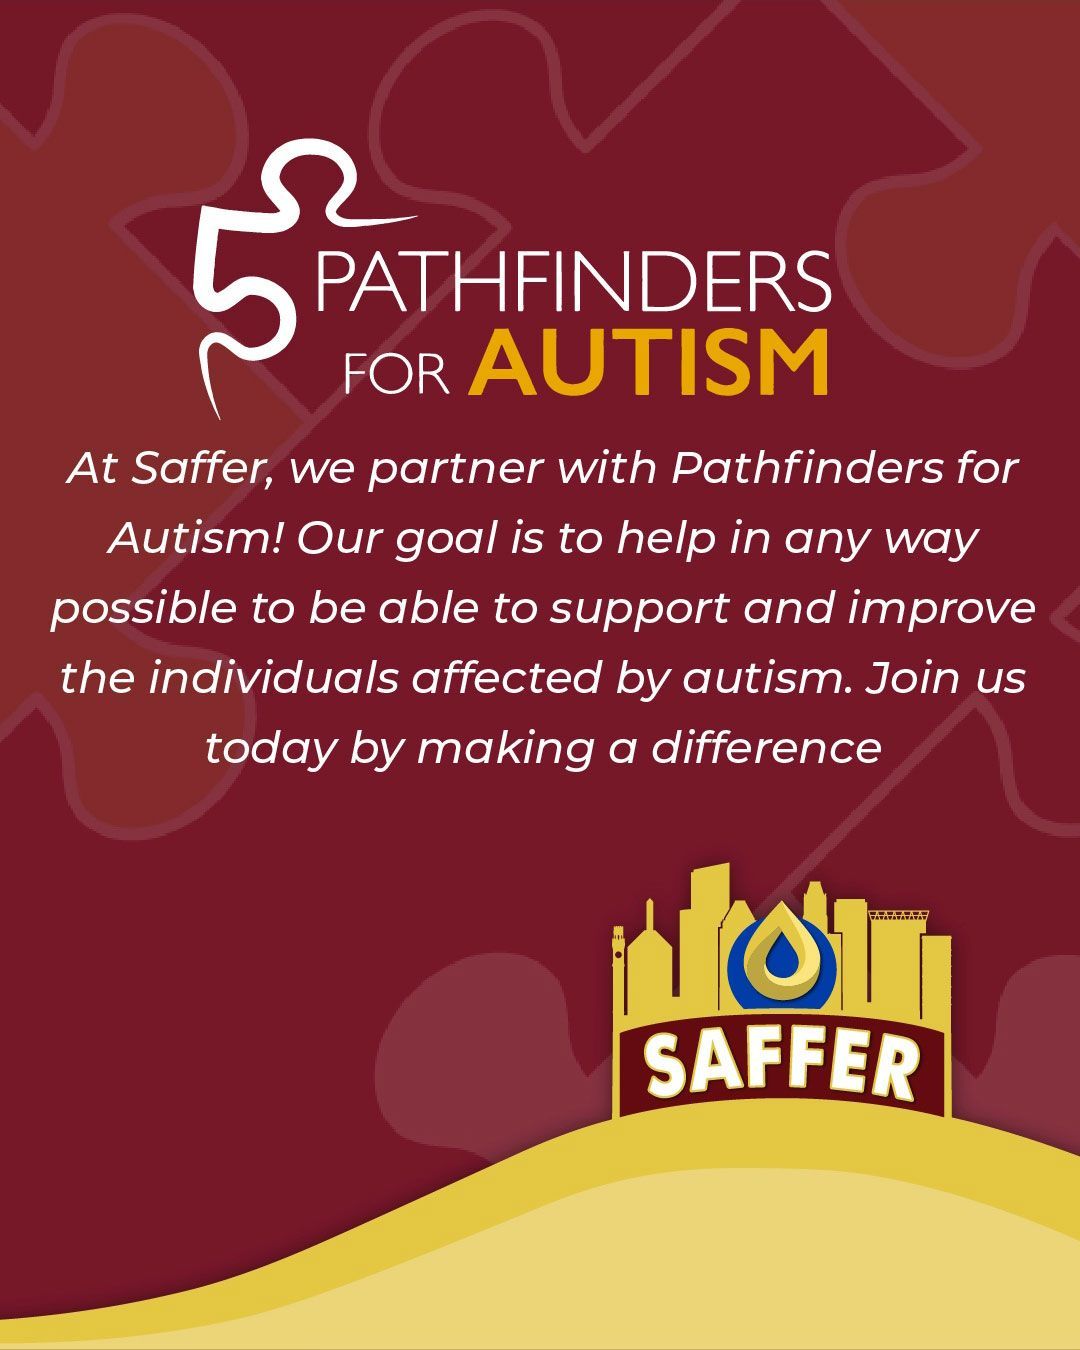 Saffer partners with Pathfinders for Autism